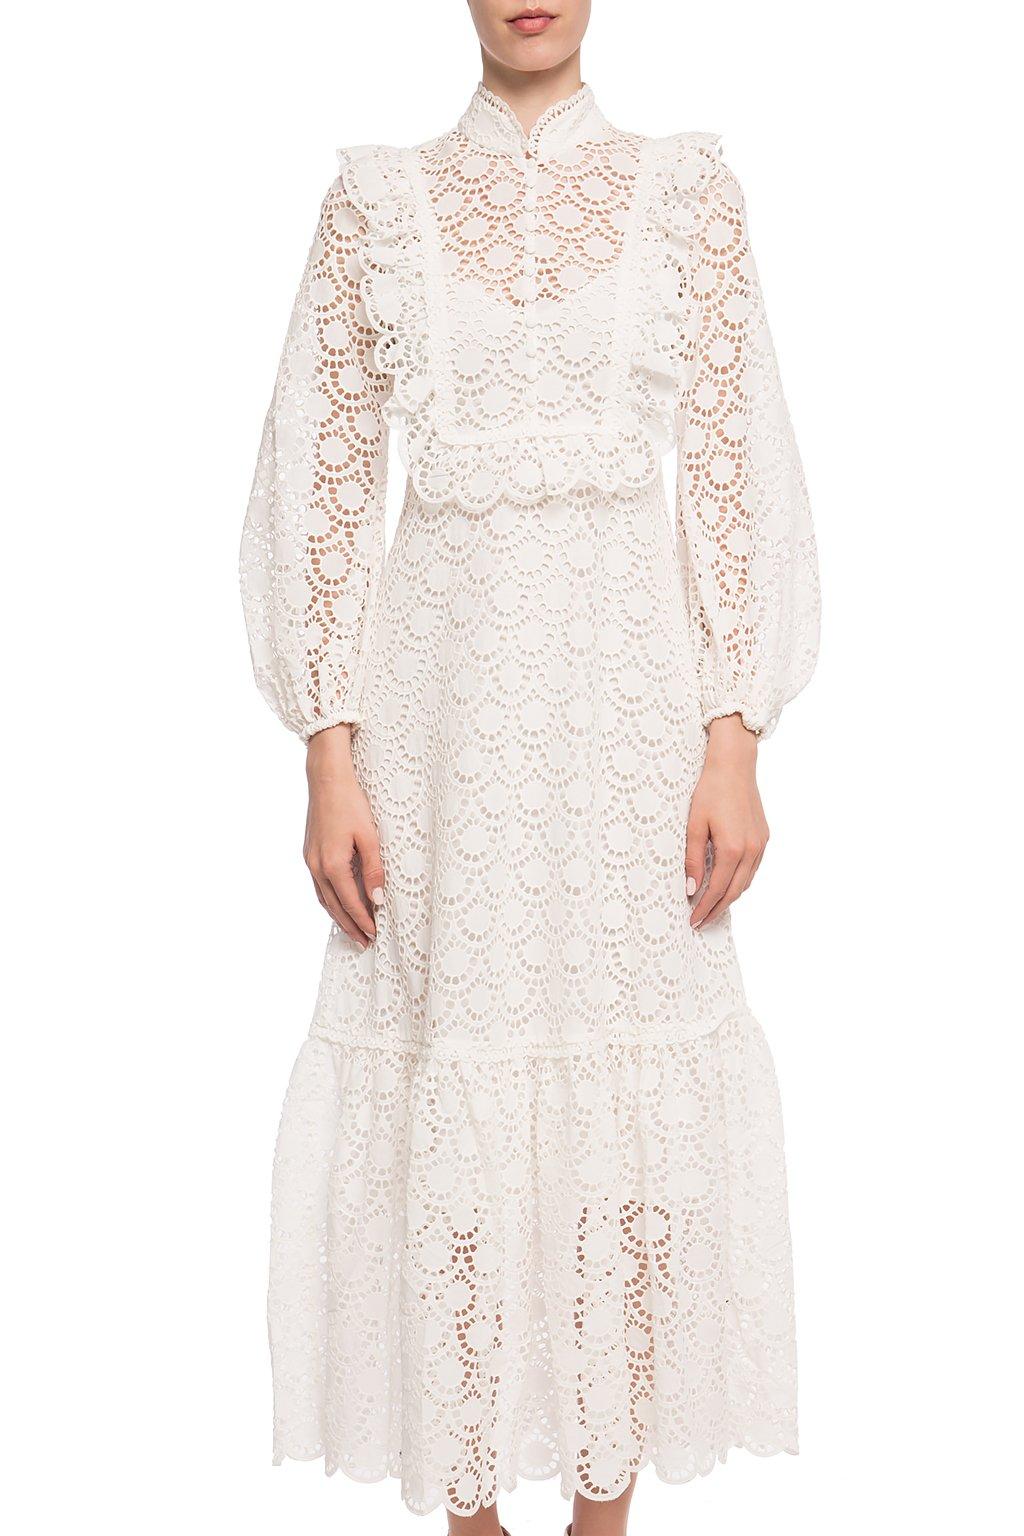 Zimmermann Lace Dress With Standing Collar in White - Lyst